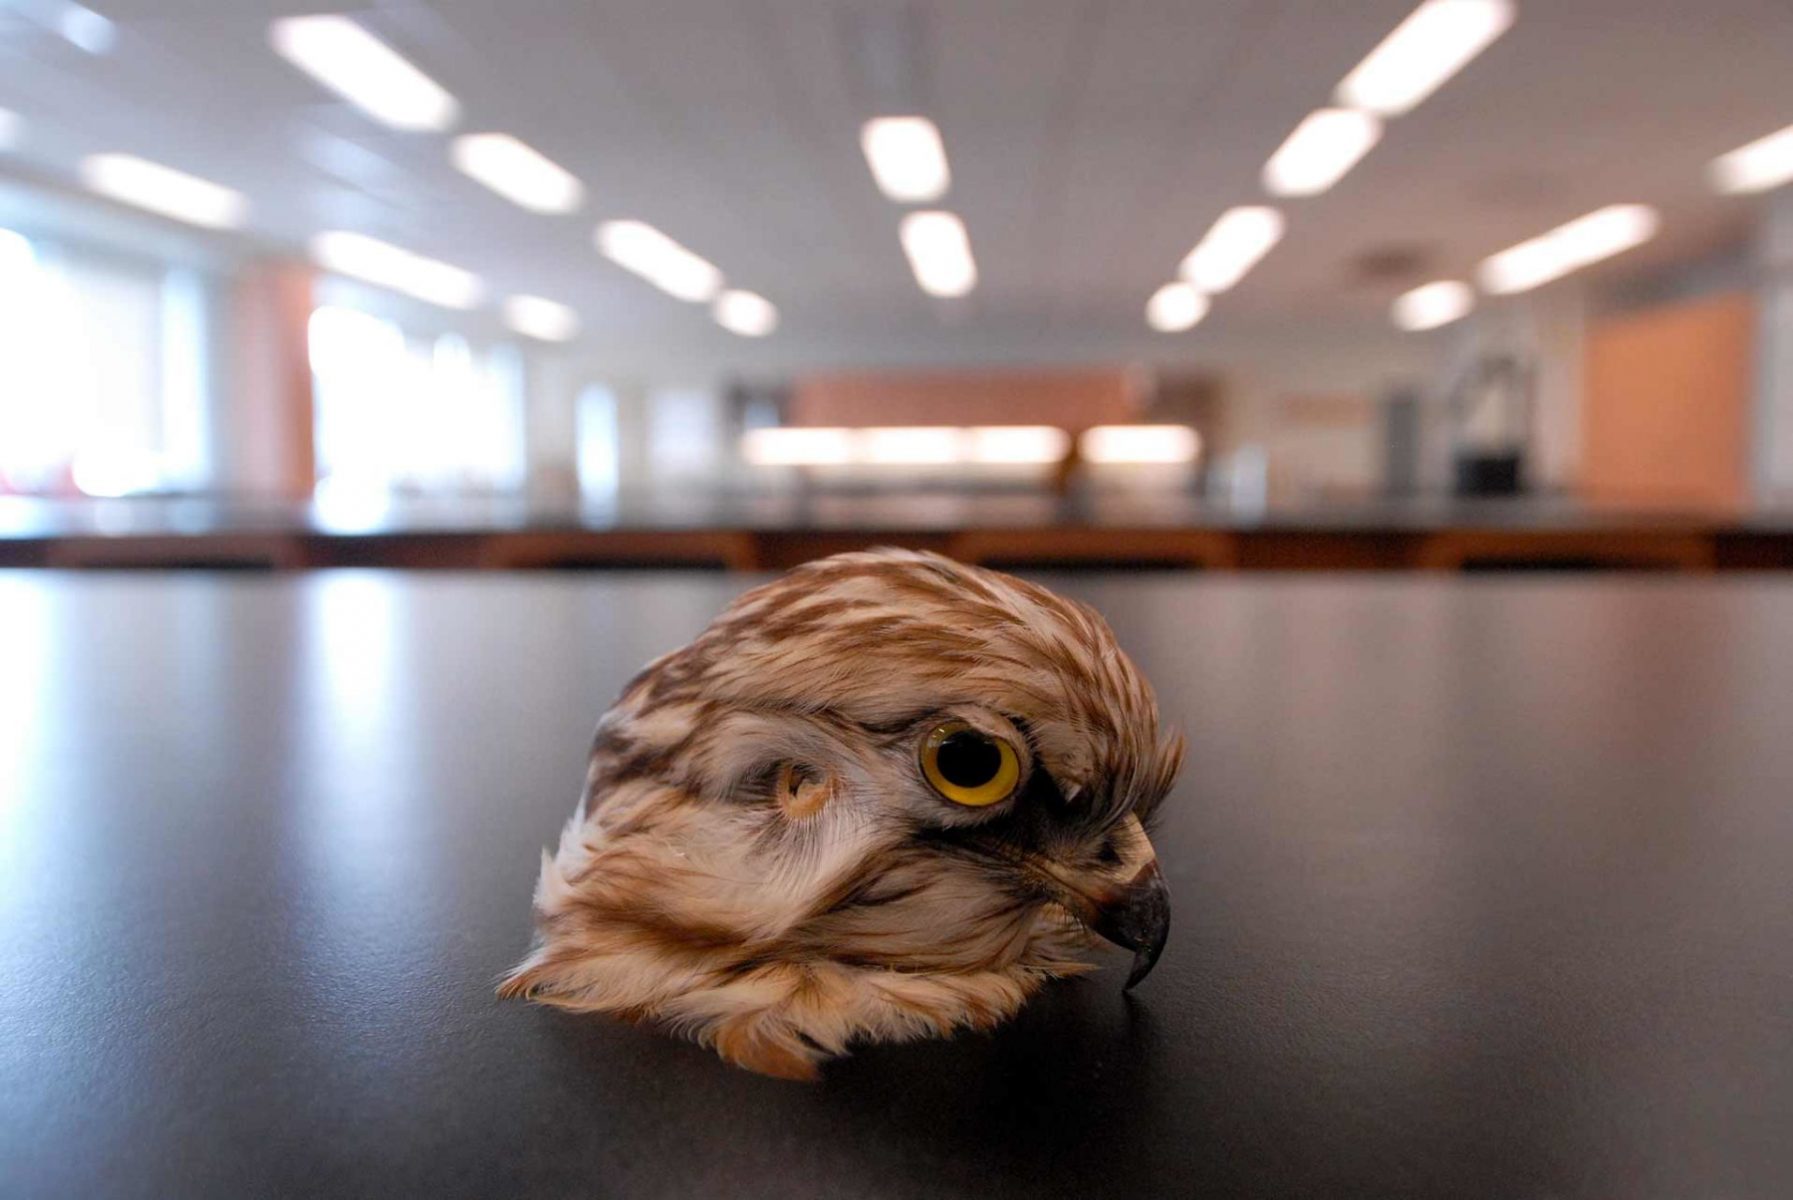 The head of a red-tailed hawk at a veterinary school. Canada, 2005